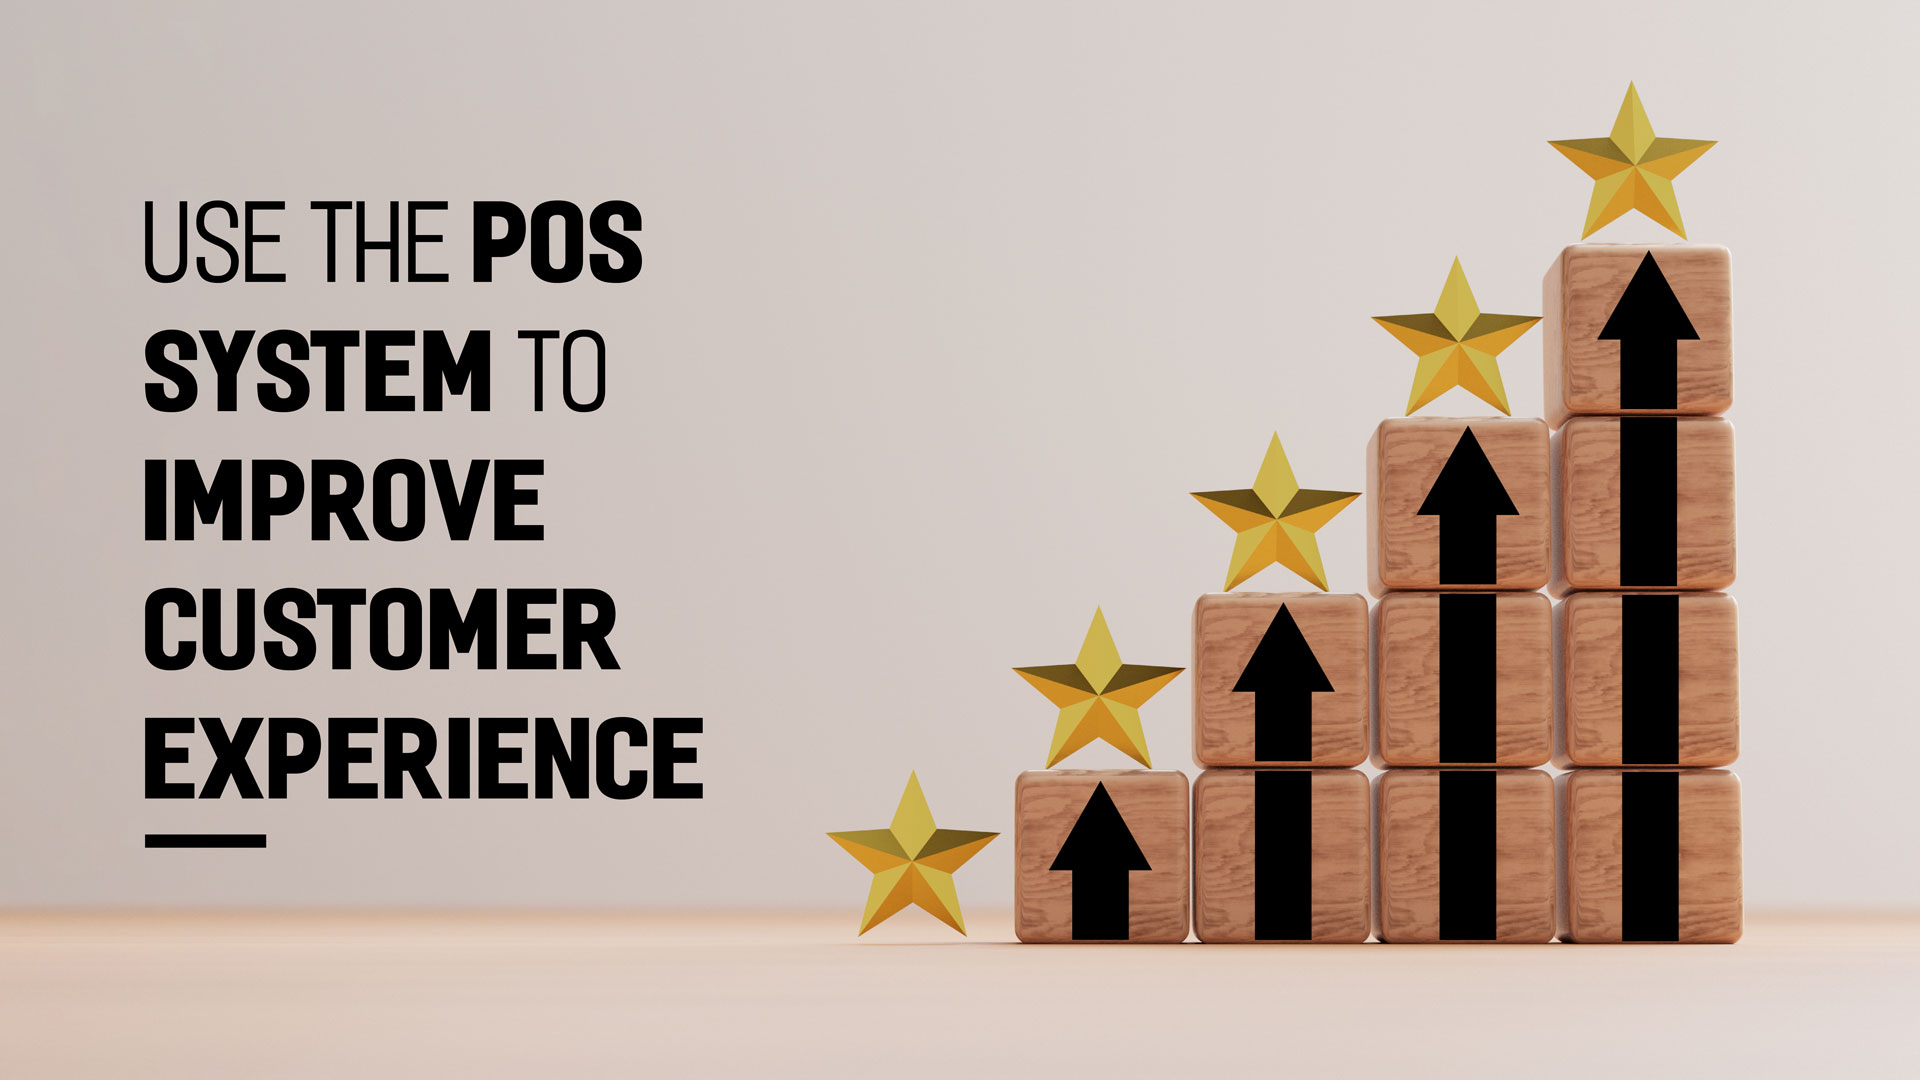 Use the POS System to improve customer experience